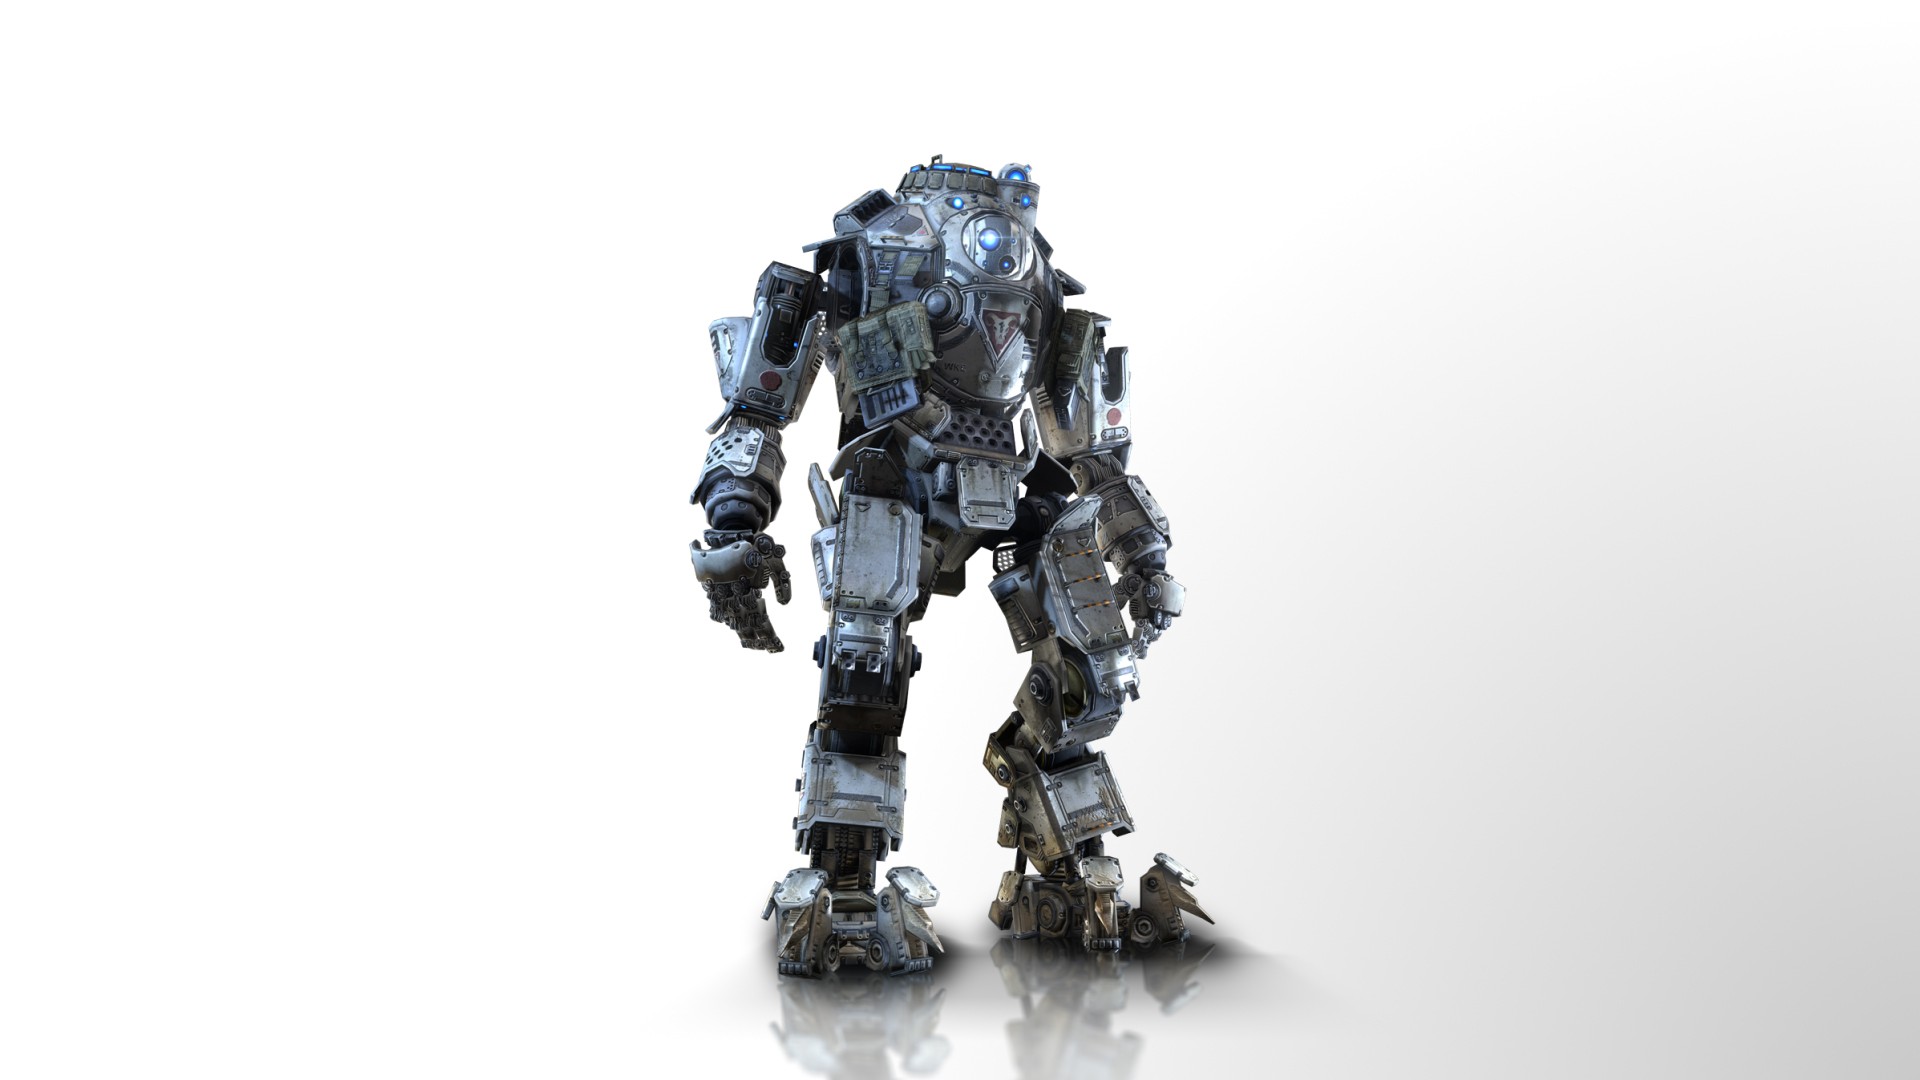 General 1920x1080 Titanfall video games CGI video game art simple background science fiction white background